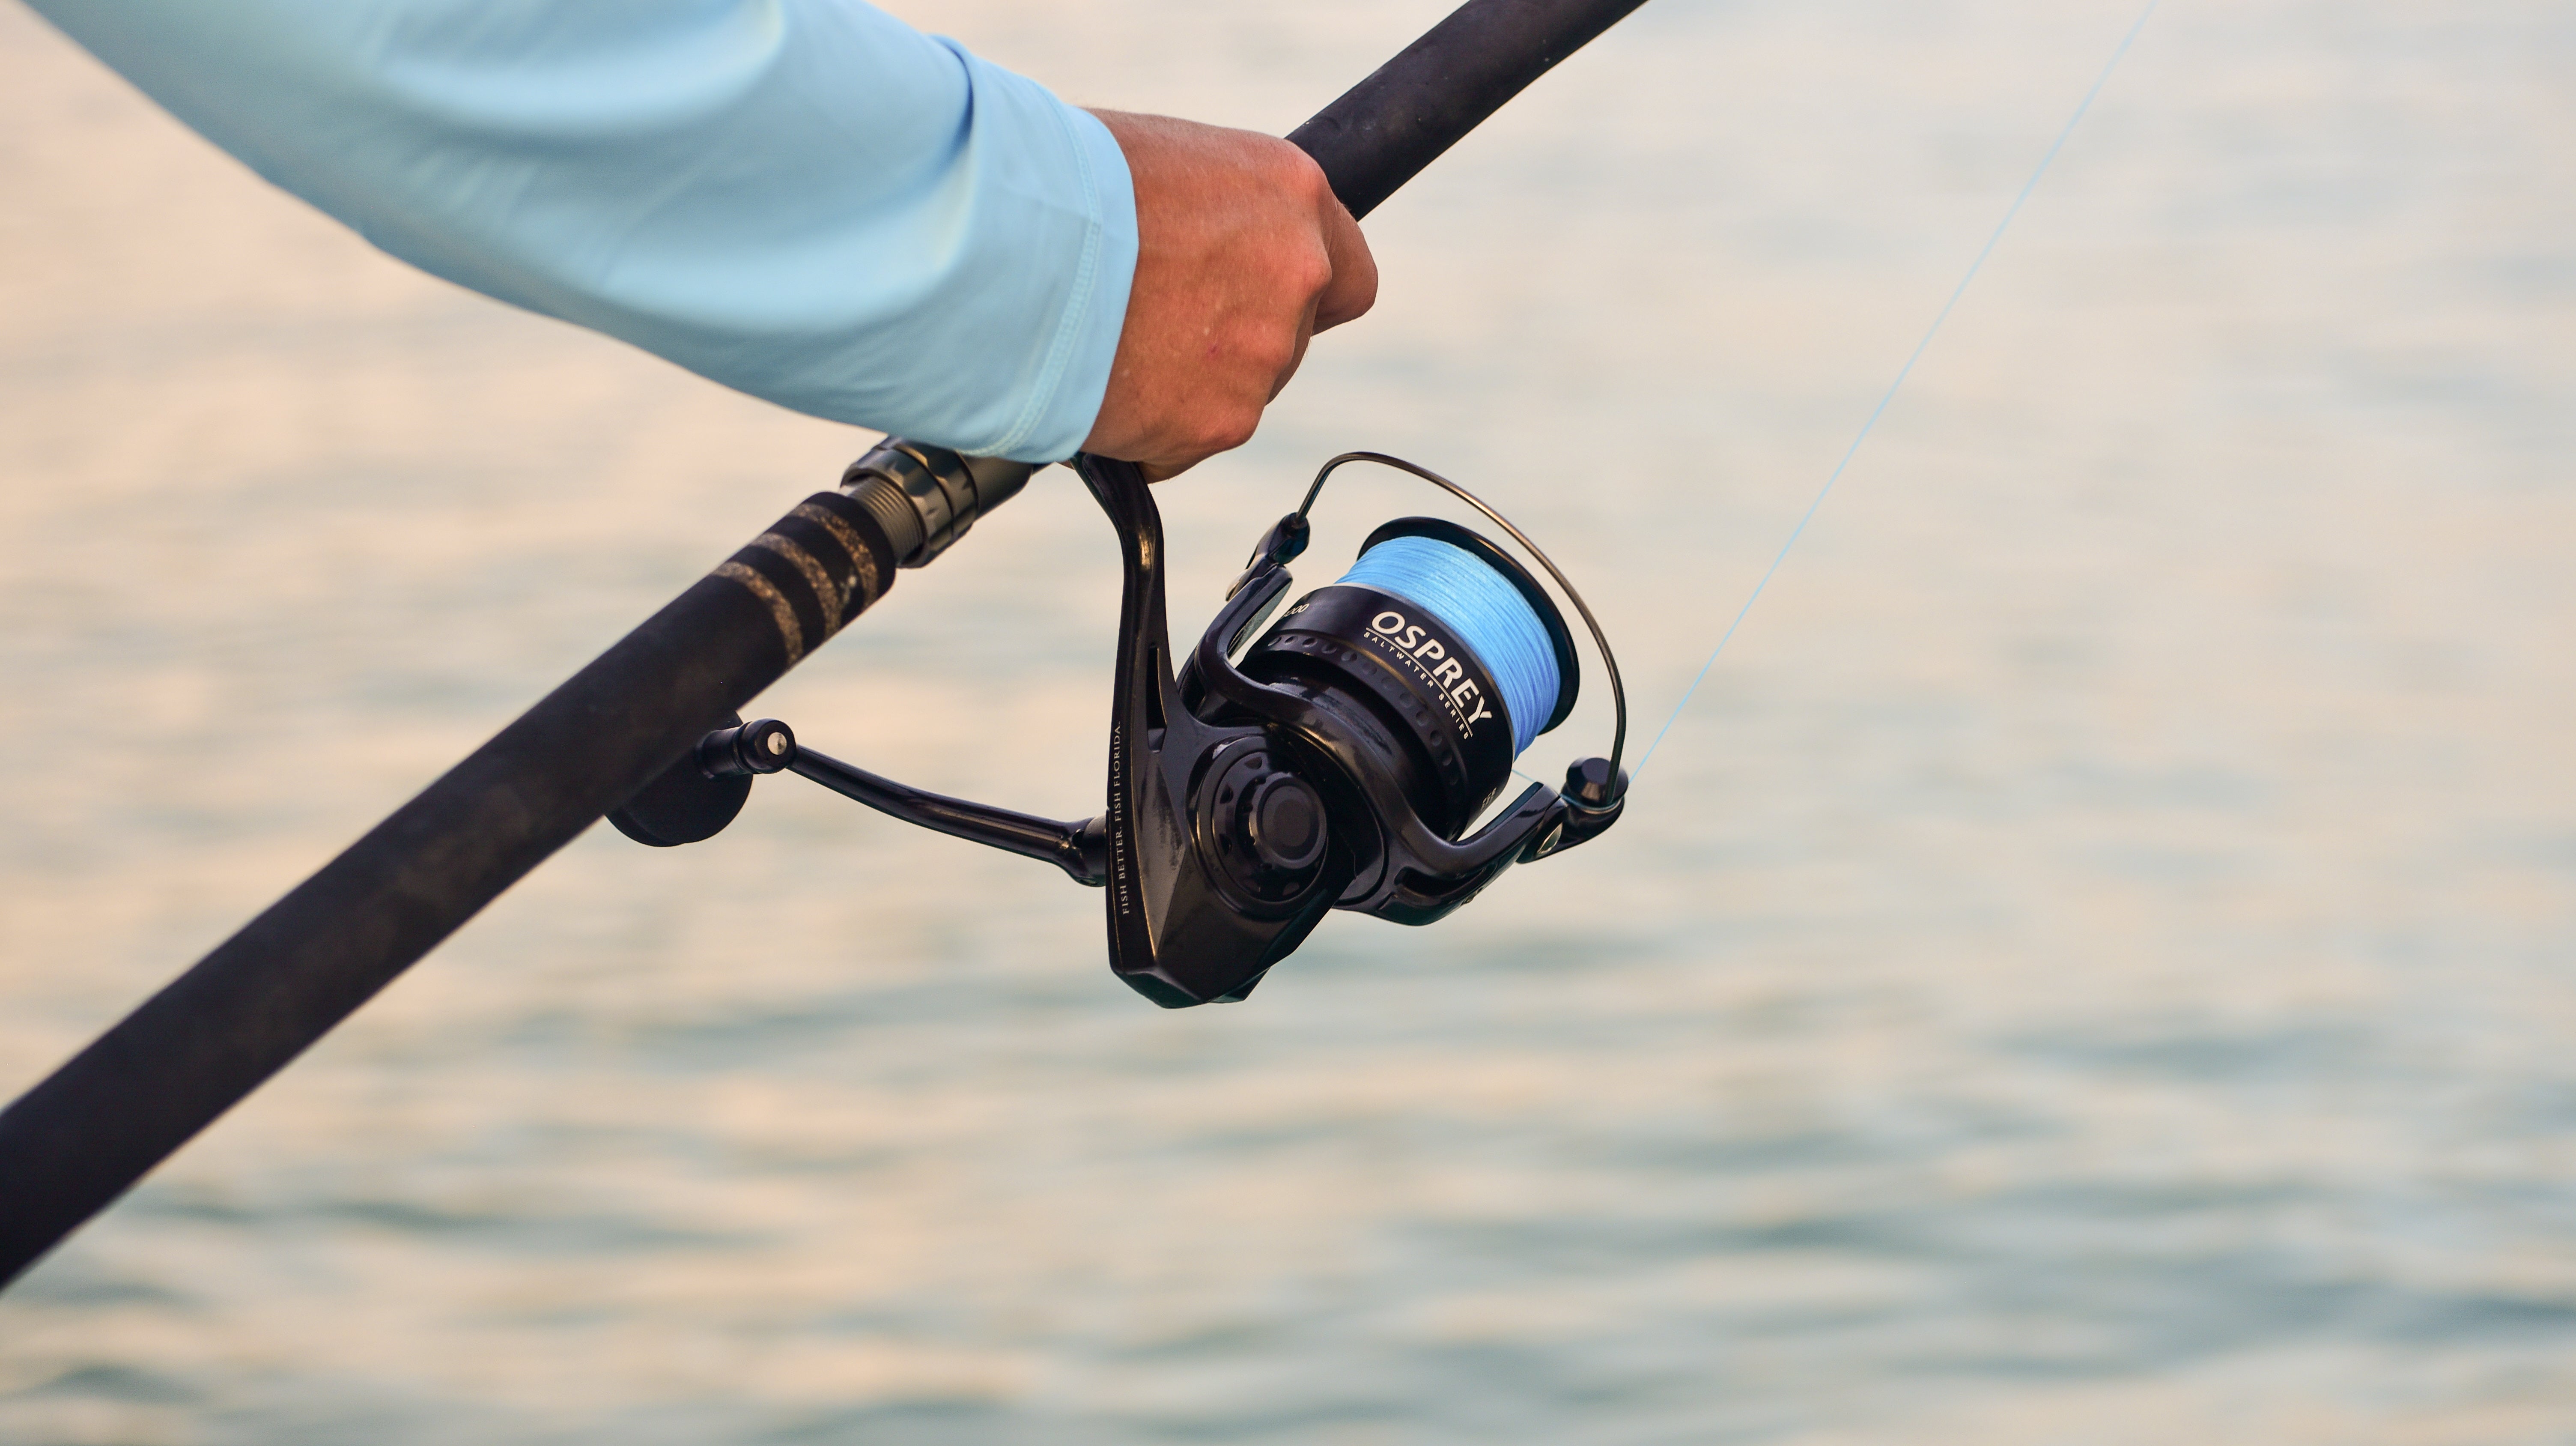 2020 Black Friday Cyber Monday Fishing Deals Florida Fishing Products